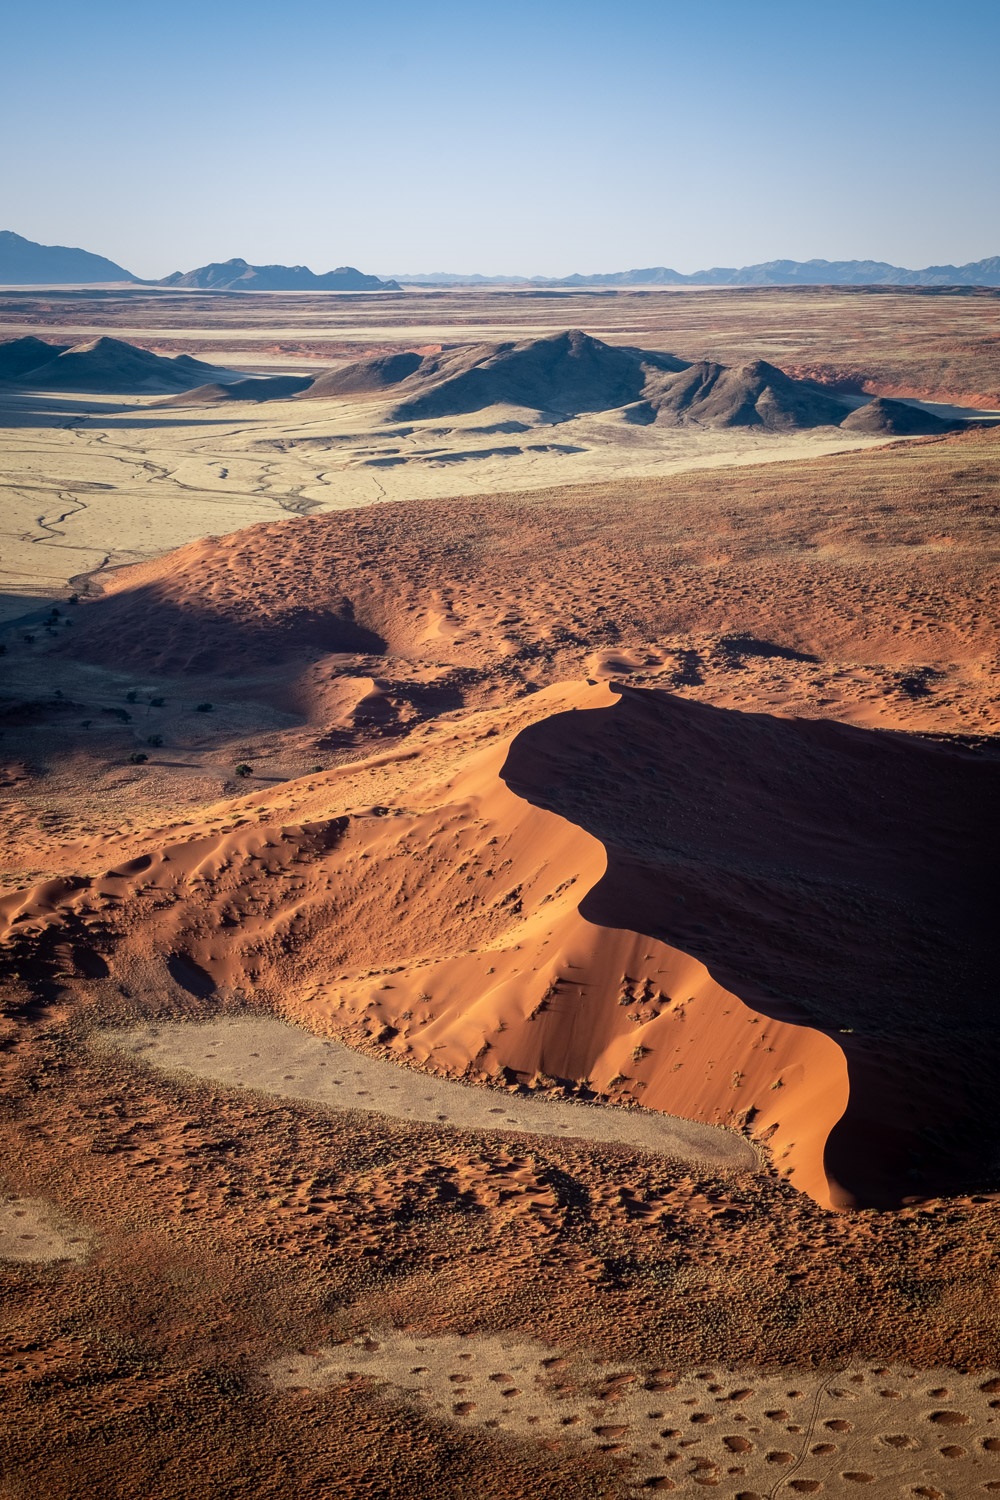 The views from Namib Sky balloons are constantly s